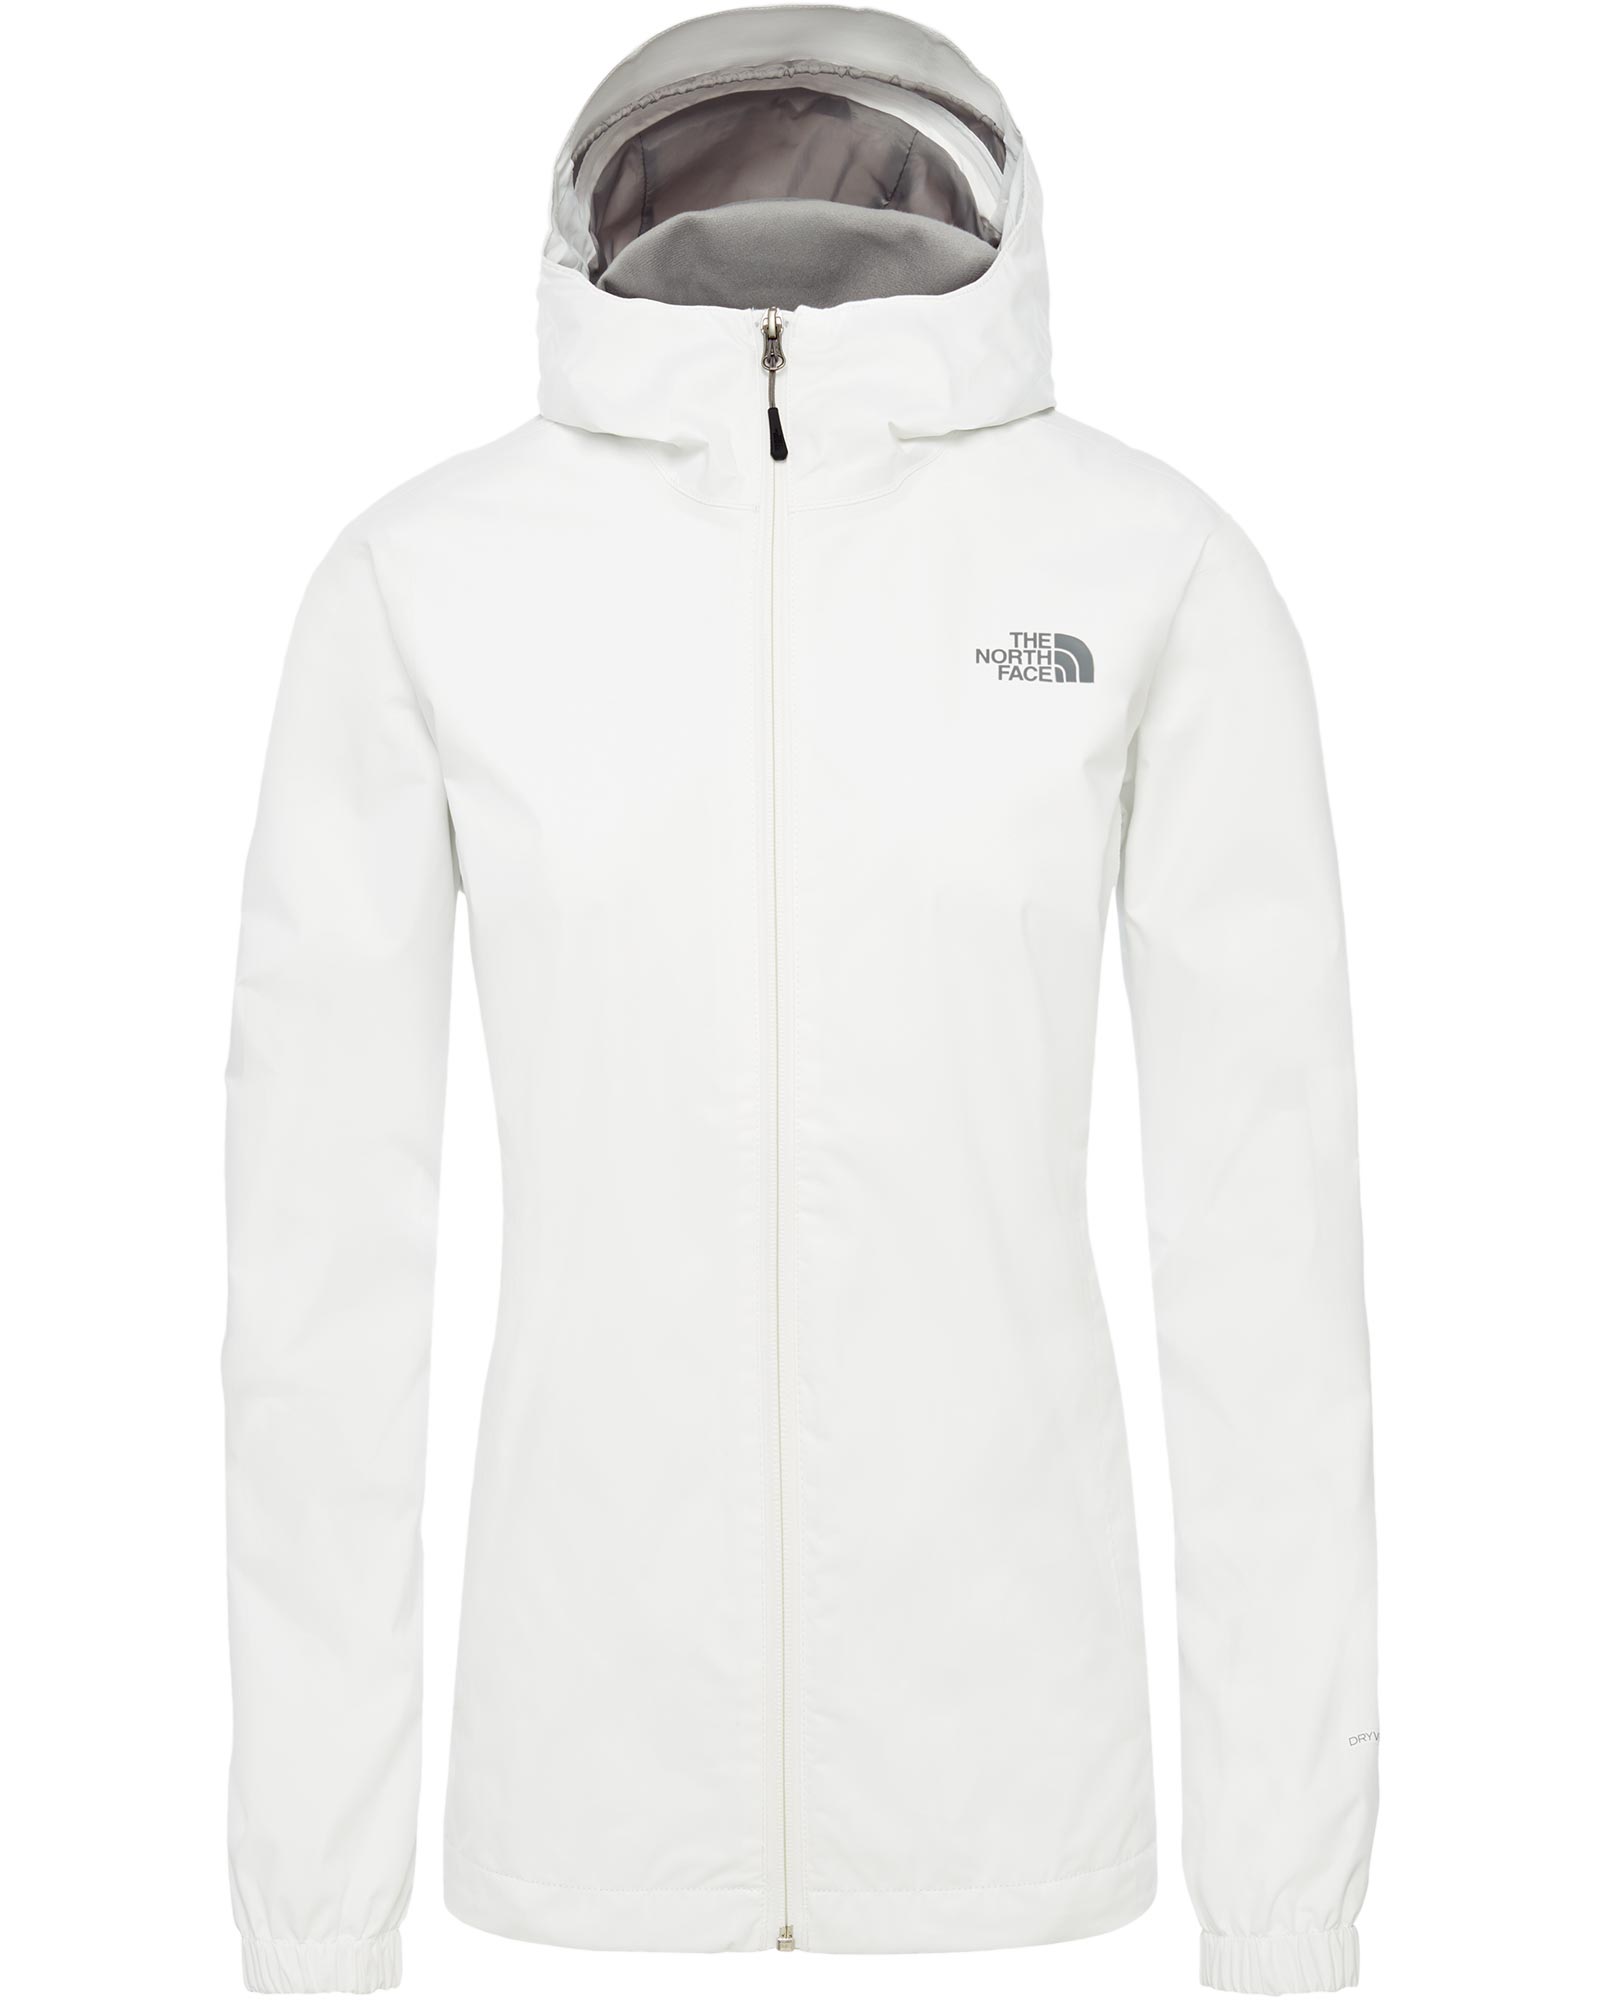 The North Face Quest DryVent Women’s Jacket - TNF White S